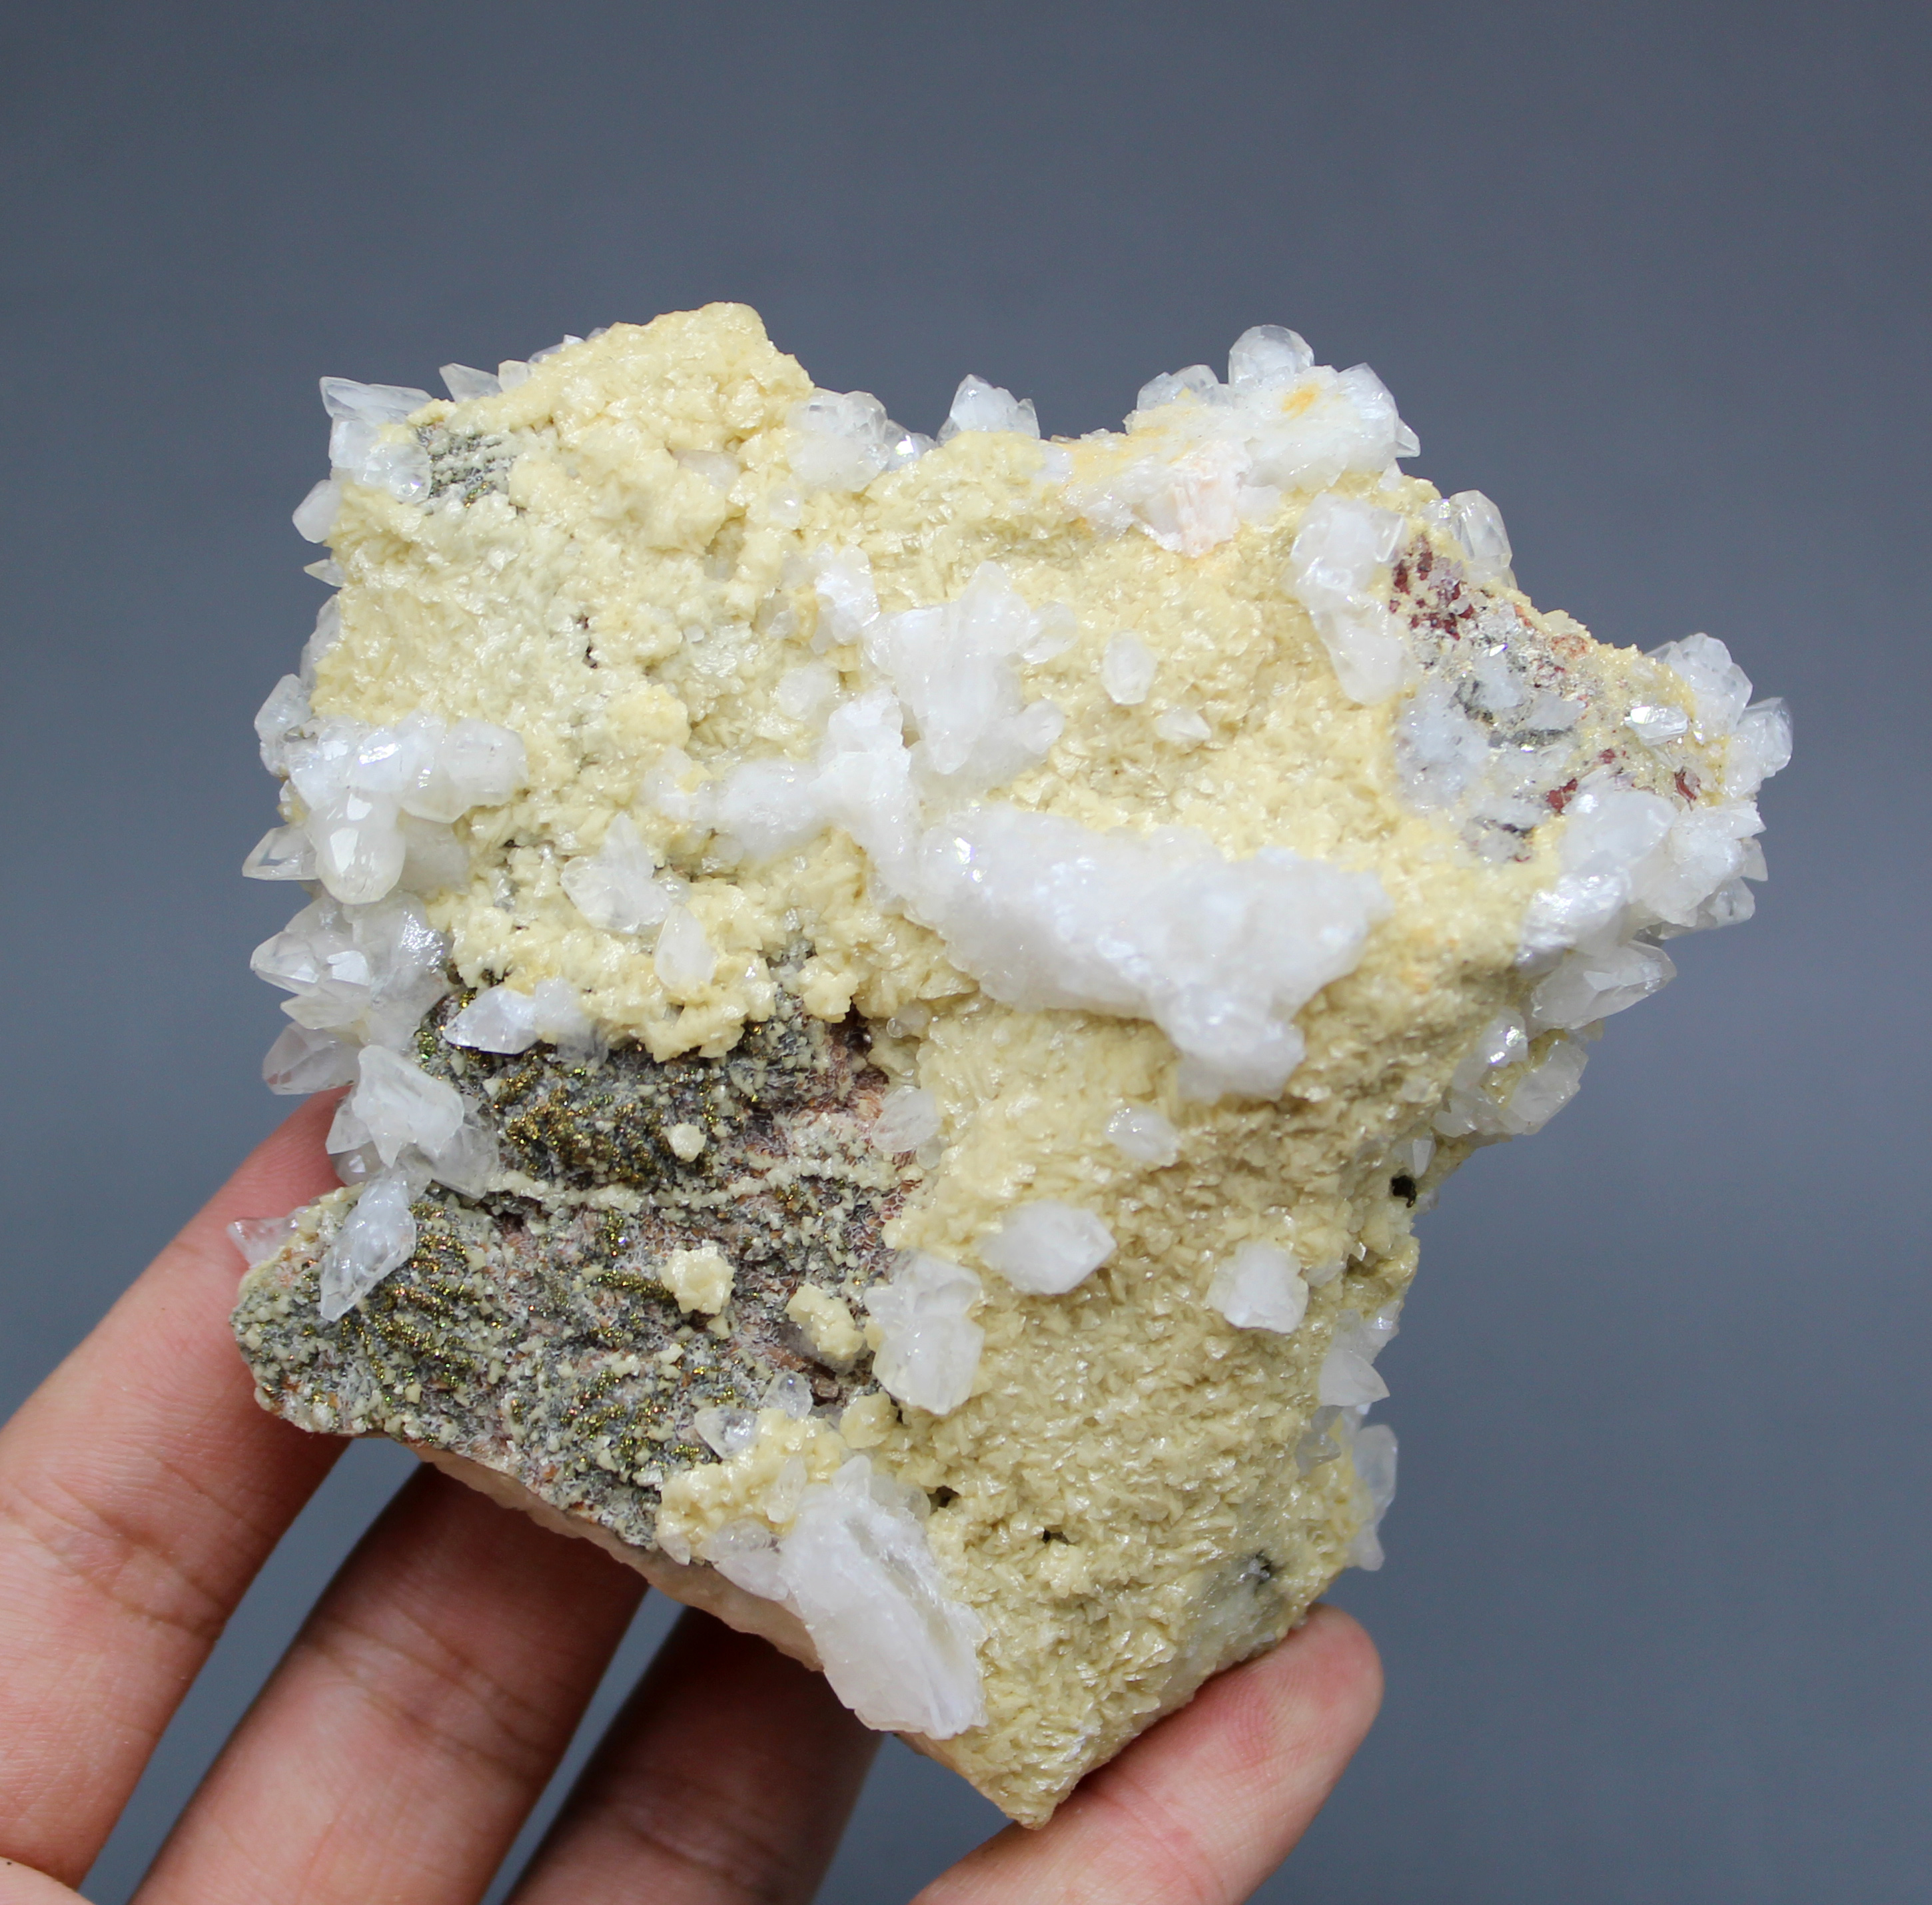 316g natural Calcite and Dolomite Symbiotic Mineral Specimen stones and crystals healing crystals quartz gemstones free shipping